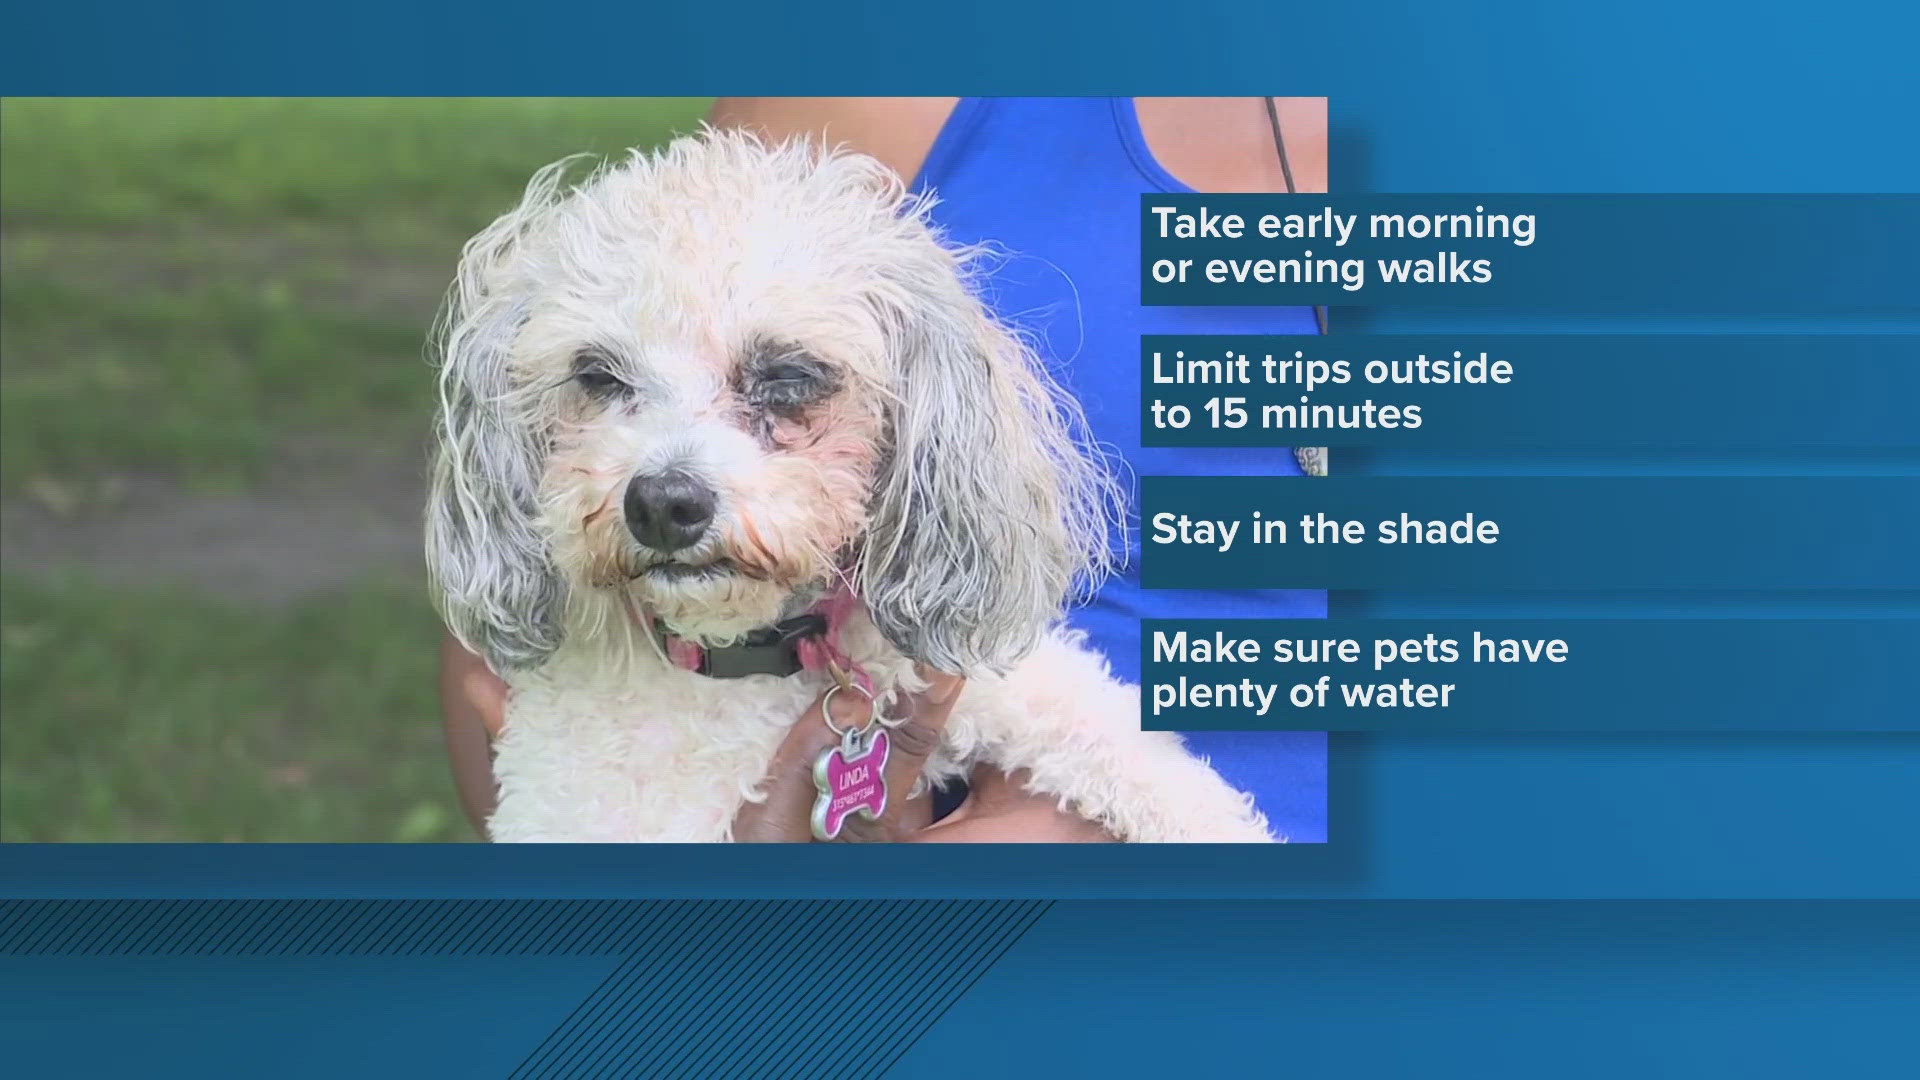 We often talk about how humans can stay safe during heat waves. But what about our furry friends?